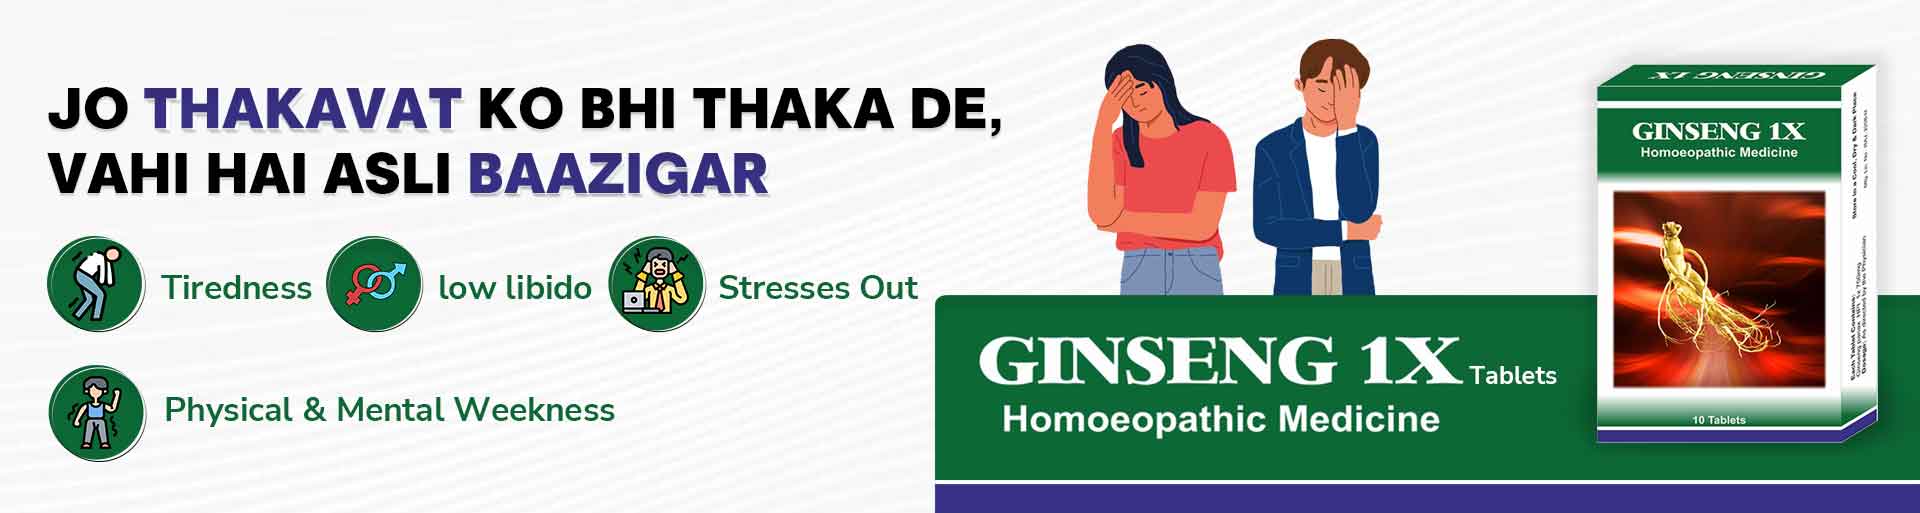 Buy Ginseng Tablet Homeopathic Medicine -Doctor Bhargava